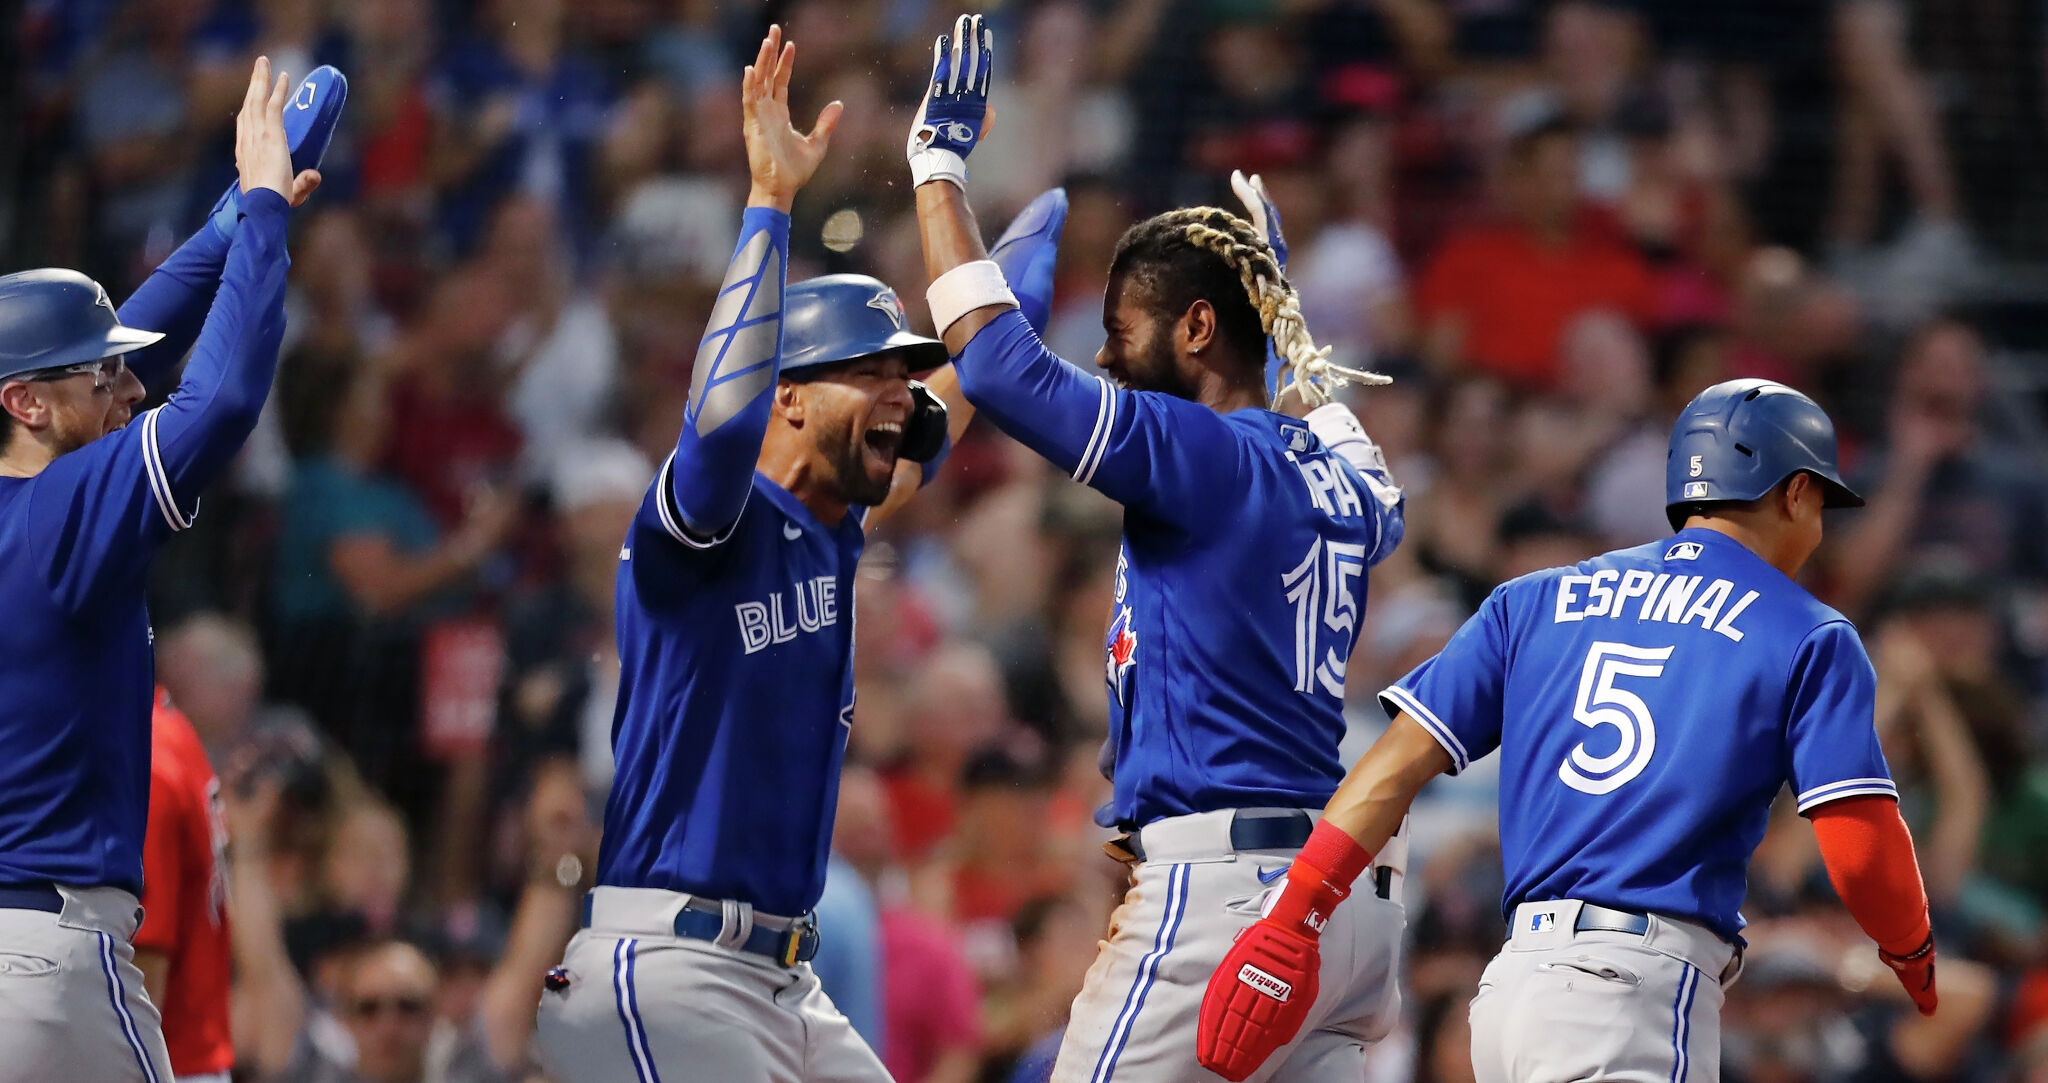 Manoah sets tone as Blue Jays defeat Red Sox for 5th straight win